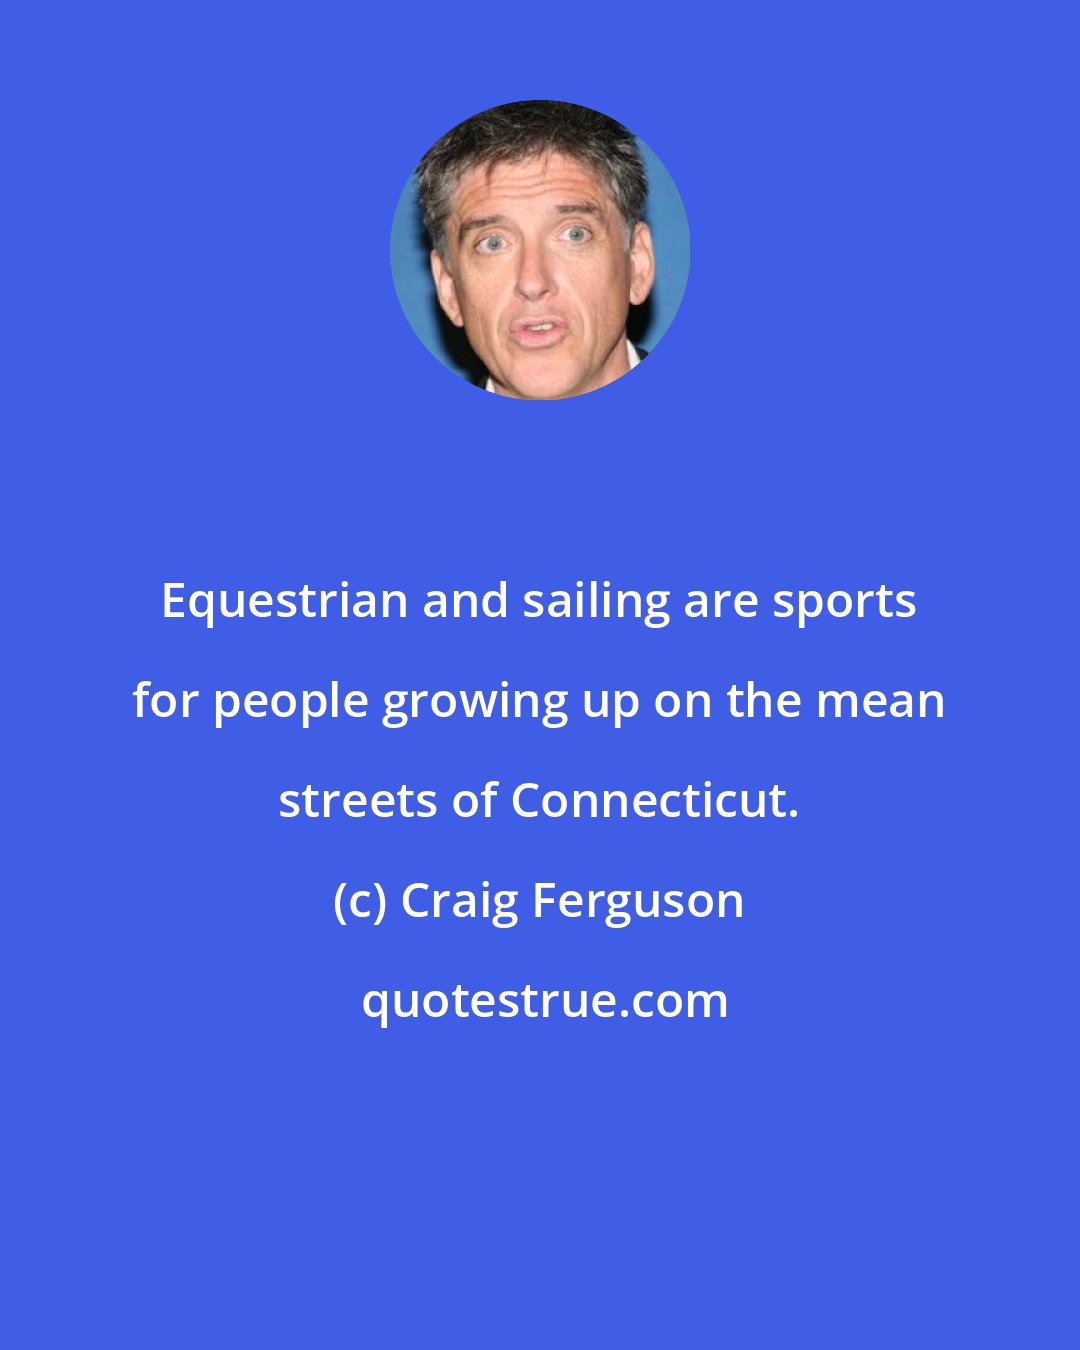 Craig Ferguson: Equestrian and sailing are sports for people growing up on the mean streets of Connecticut.